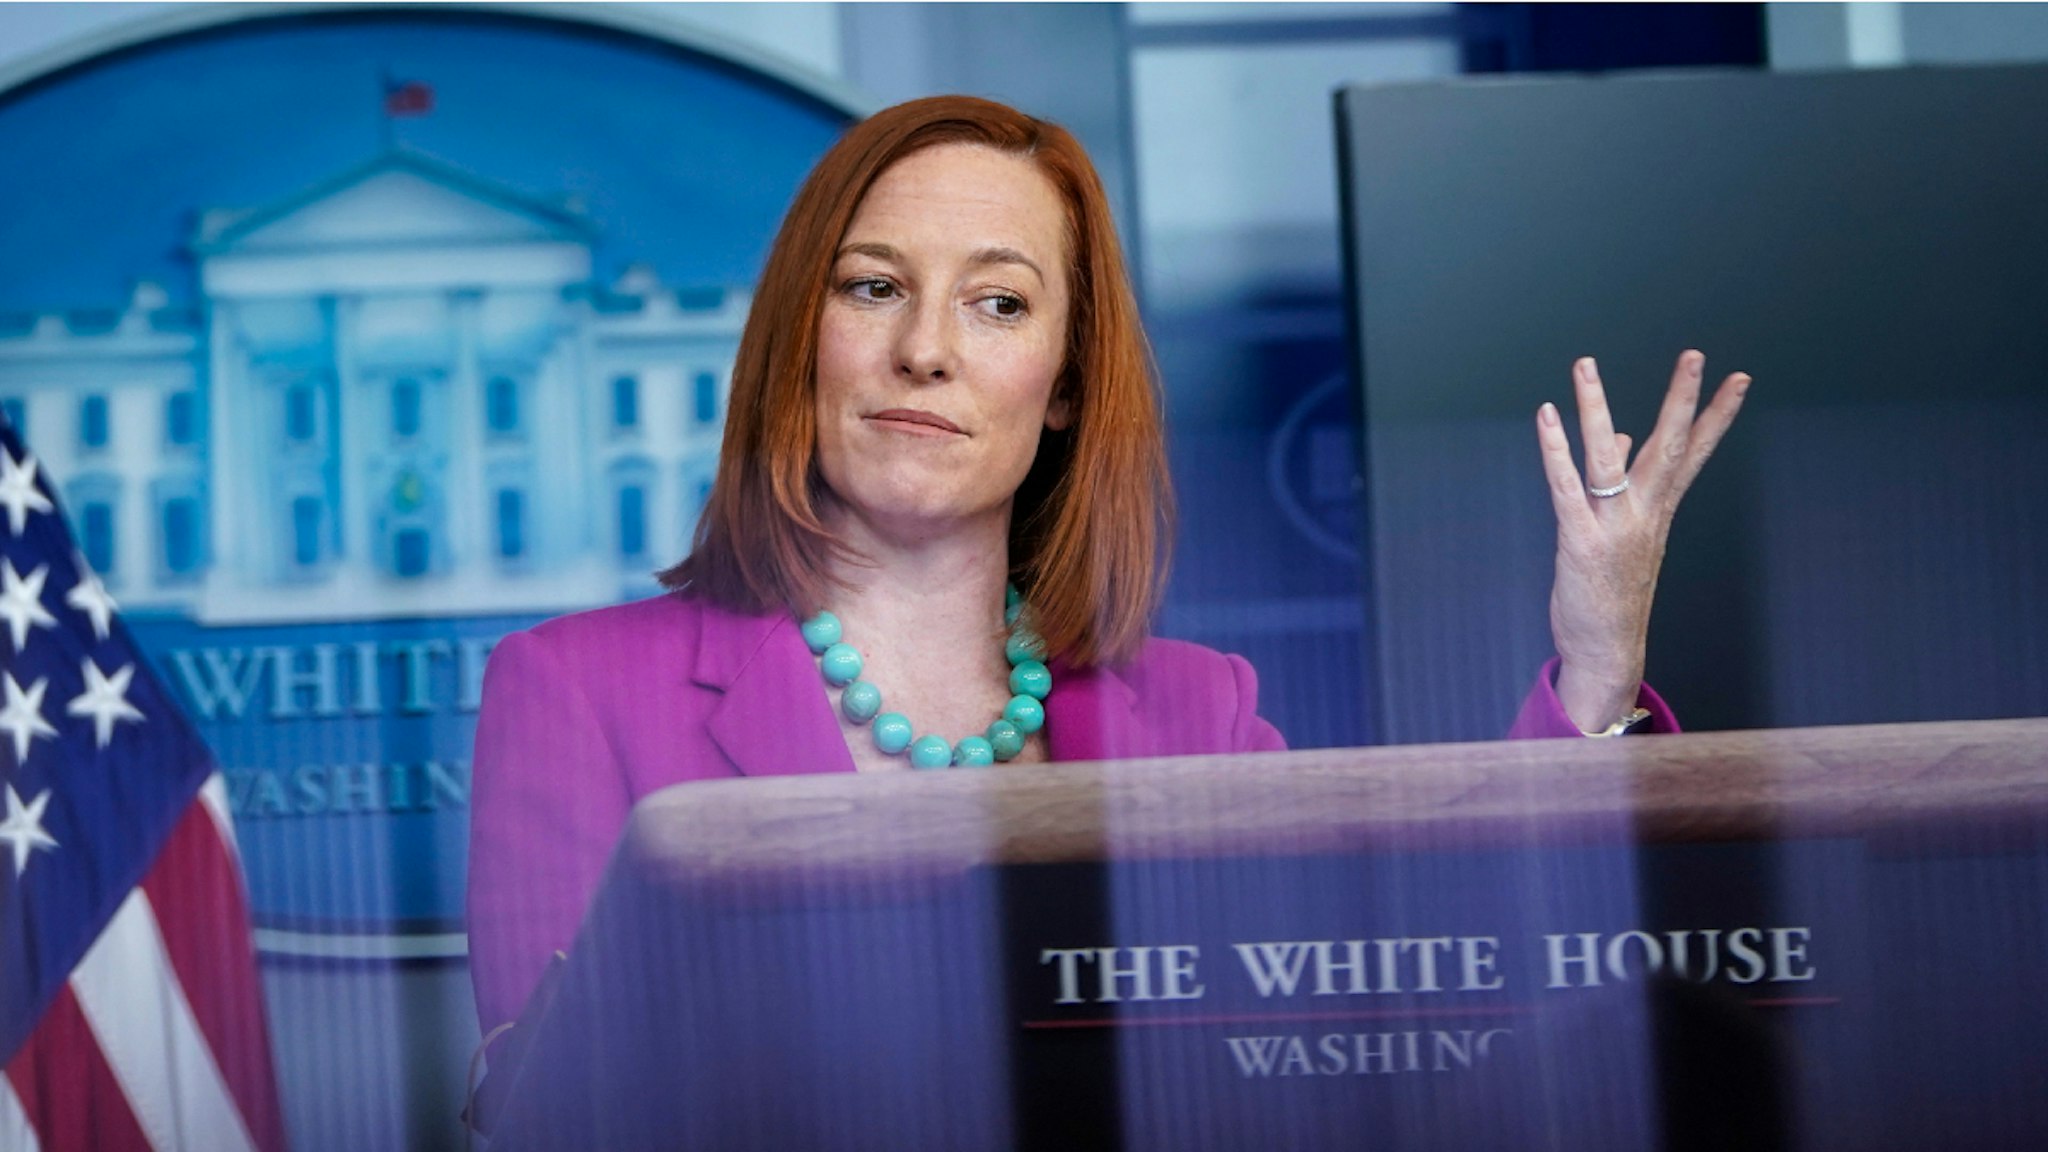 WASHINGTON, DC - JANUARY 28: White House Press Secretary Jen Psaki speaks during a daily press briefing at the White House on January 28, 2021 in Washington, DC. President Joe Biden signed a series of executive actions Thursday afternoon aimed at expanding access to health care, including re-opening enrollment for health care offered through the federal marketplace created under the Affordable Care Act.